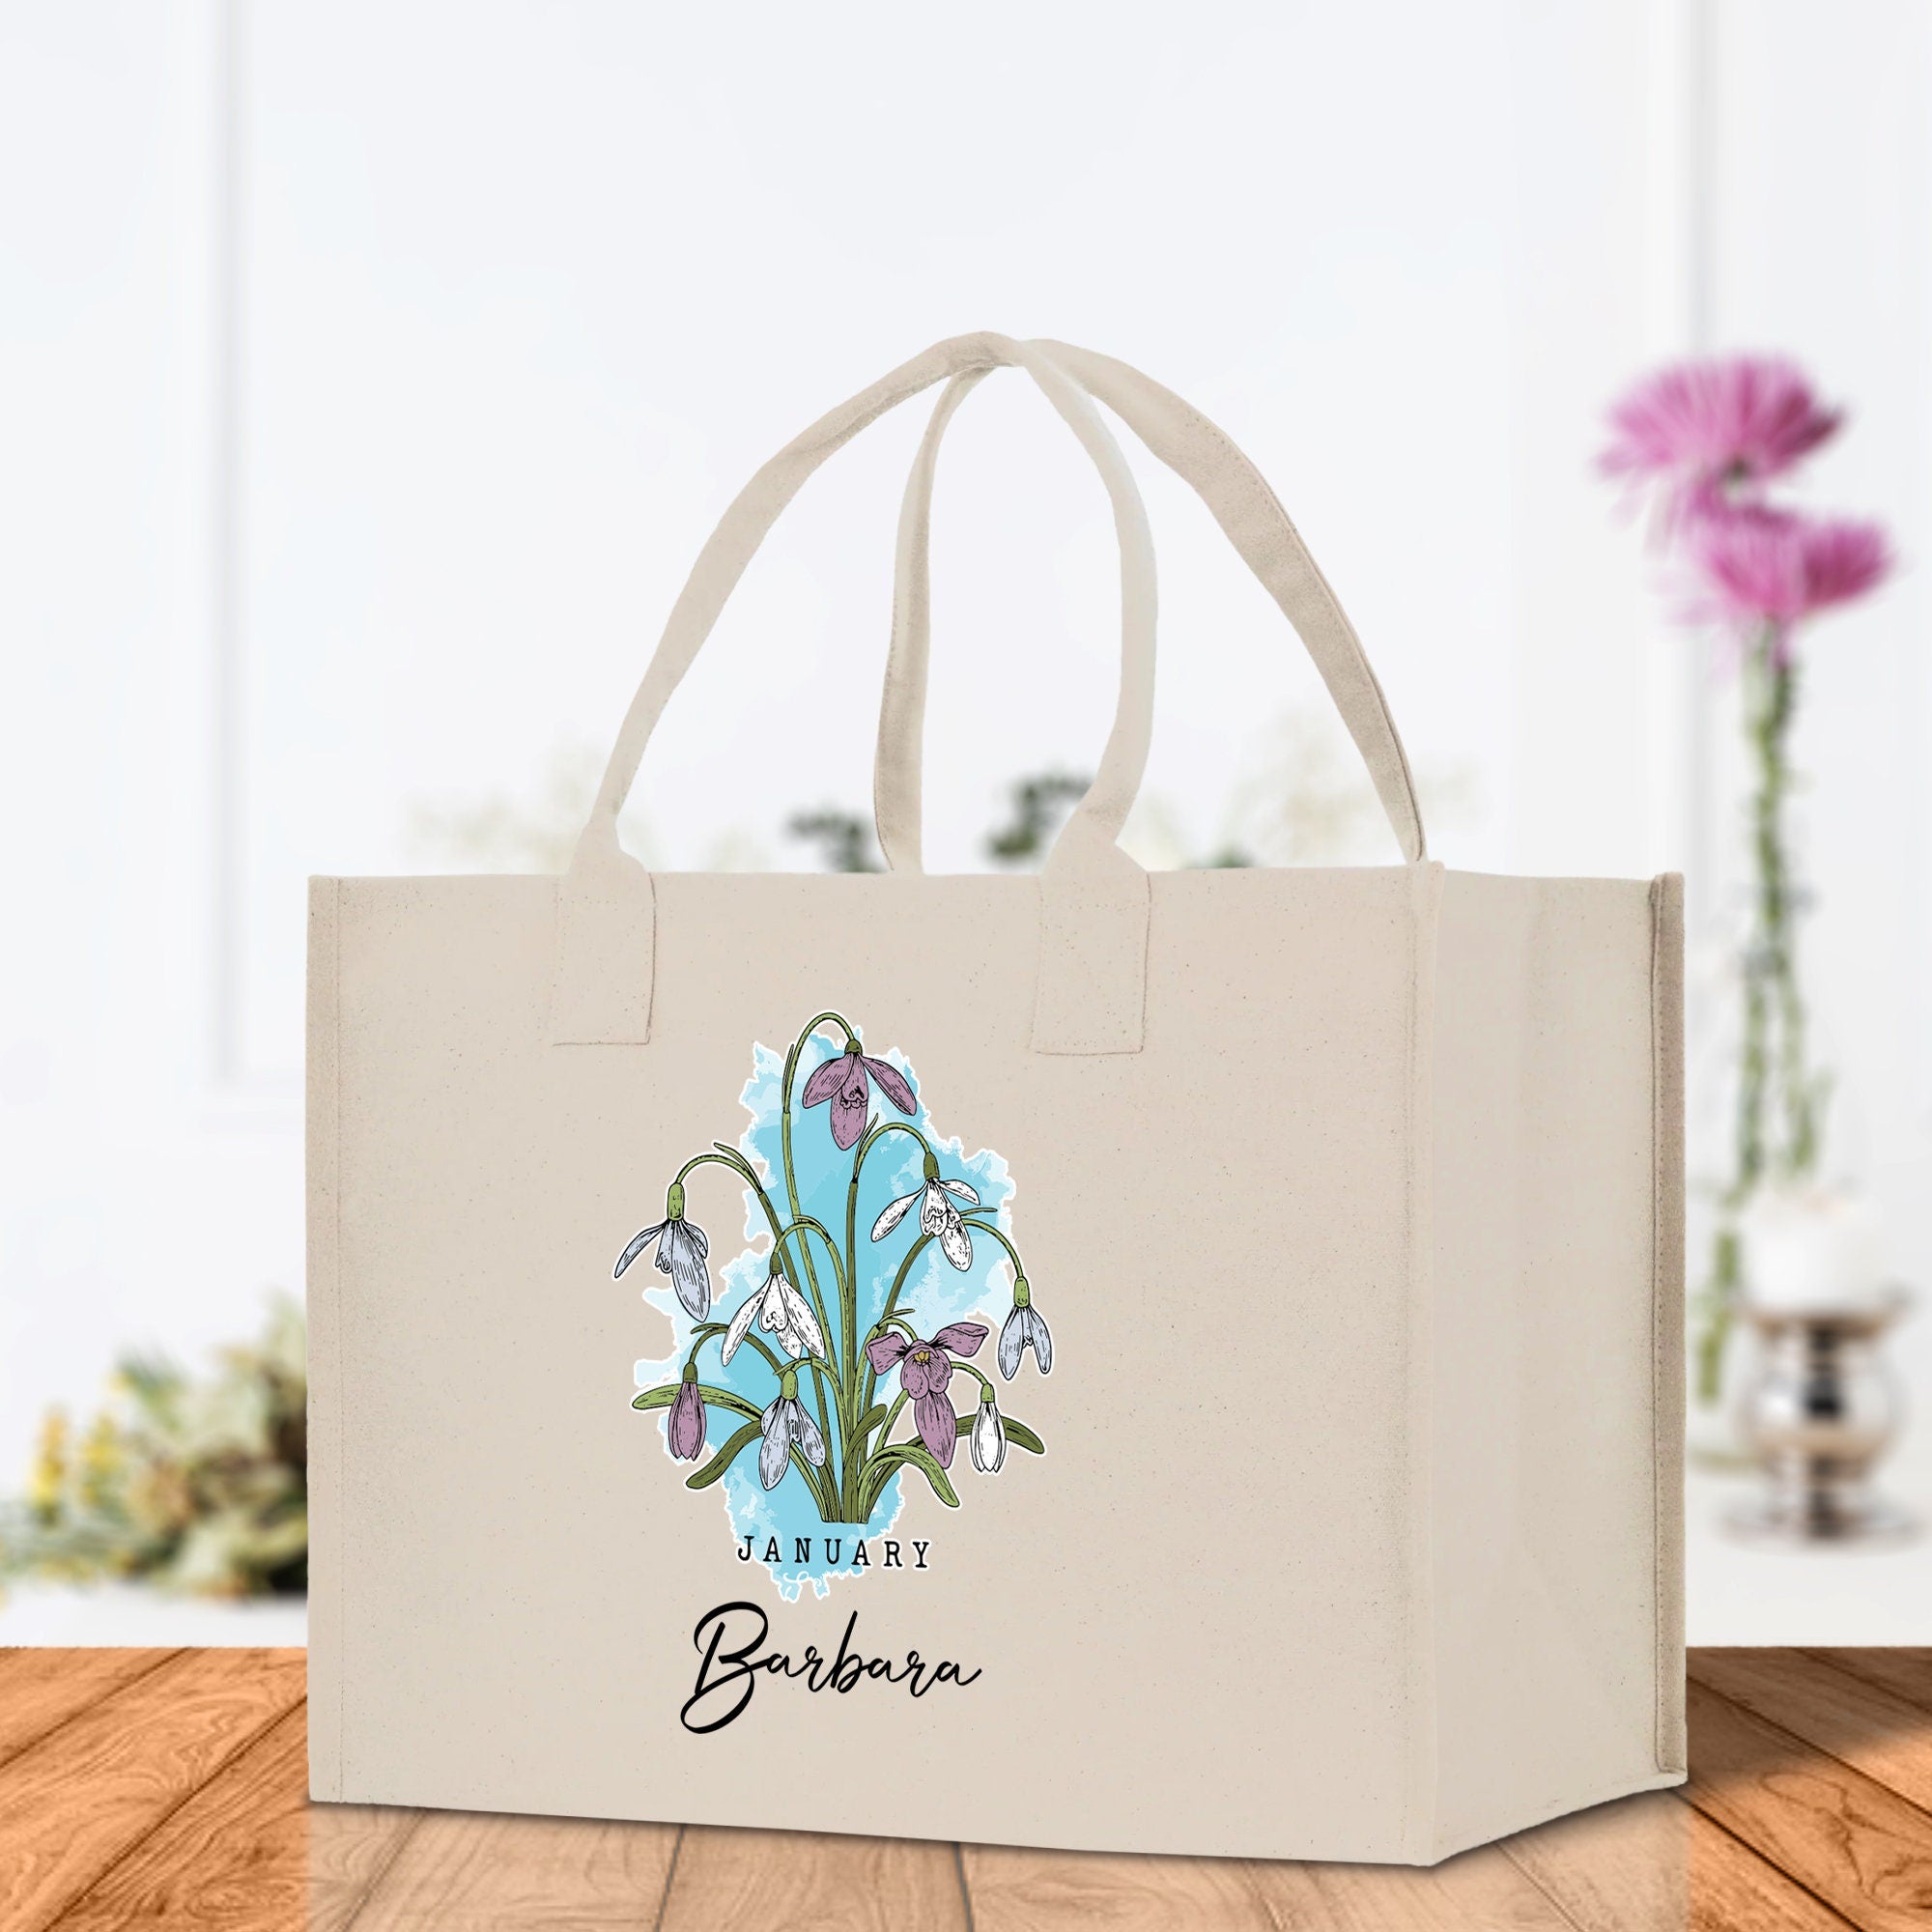 January Birth Month Flower Personalized Name Cotton Canvas Tote Bag Custom Flower Birthday Gift Bag Wedding Gift for Her Bridal Bridesmaid